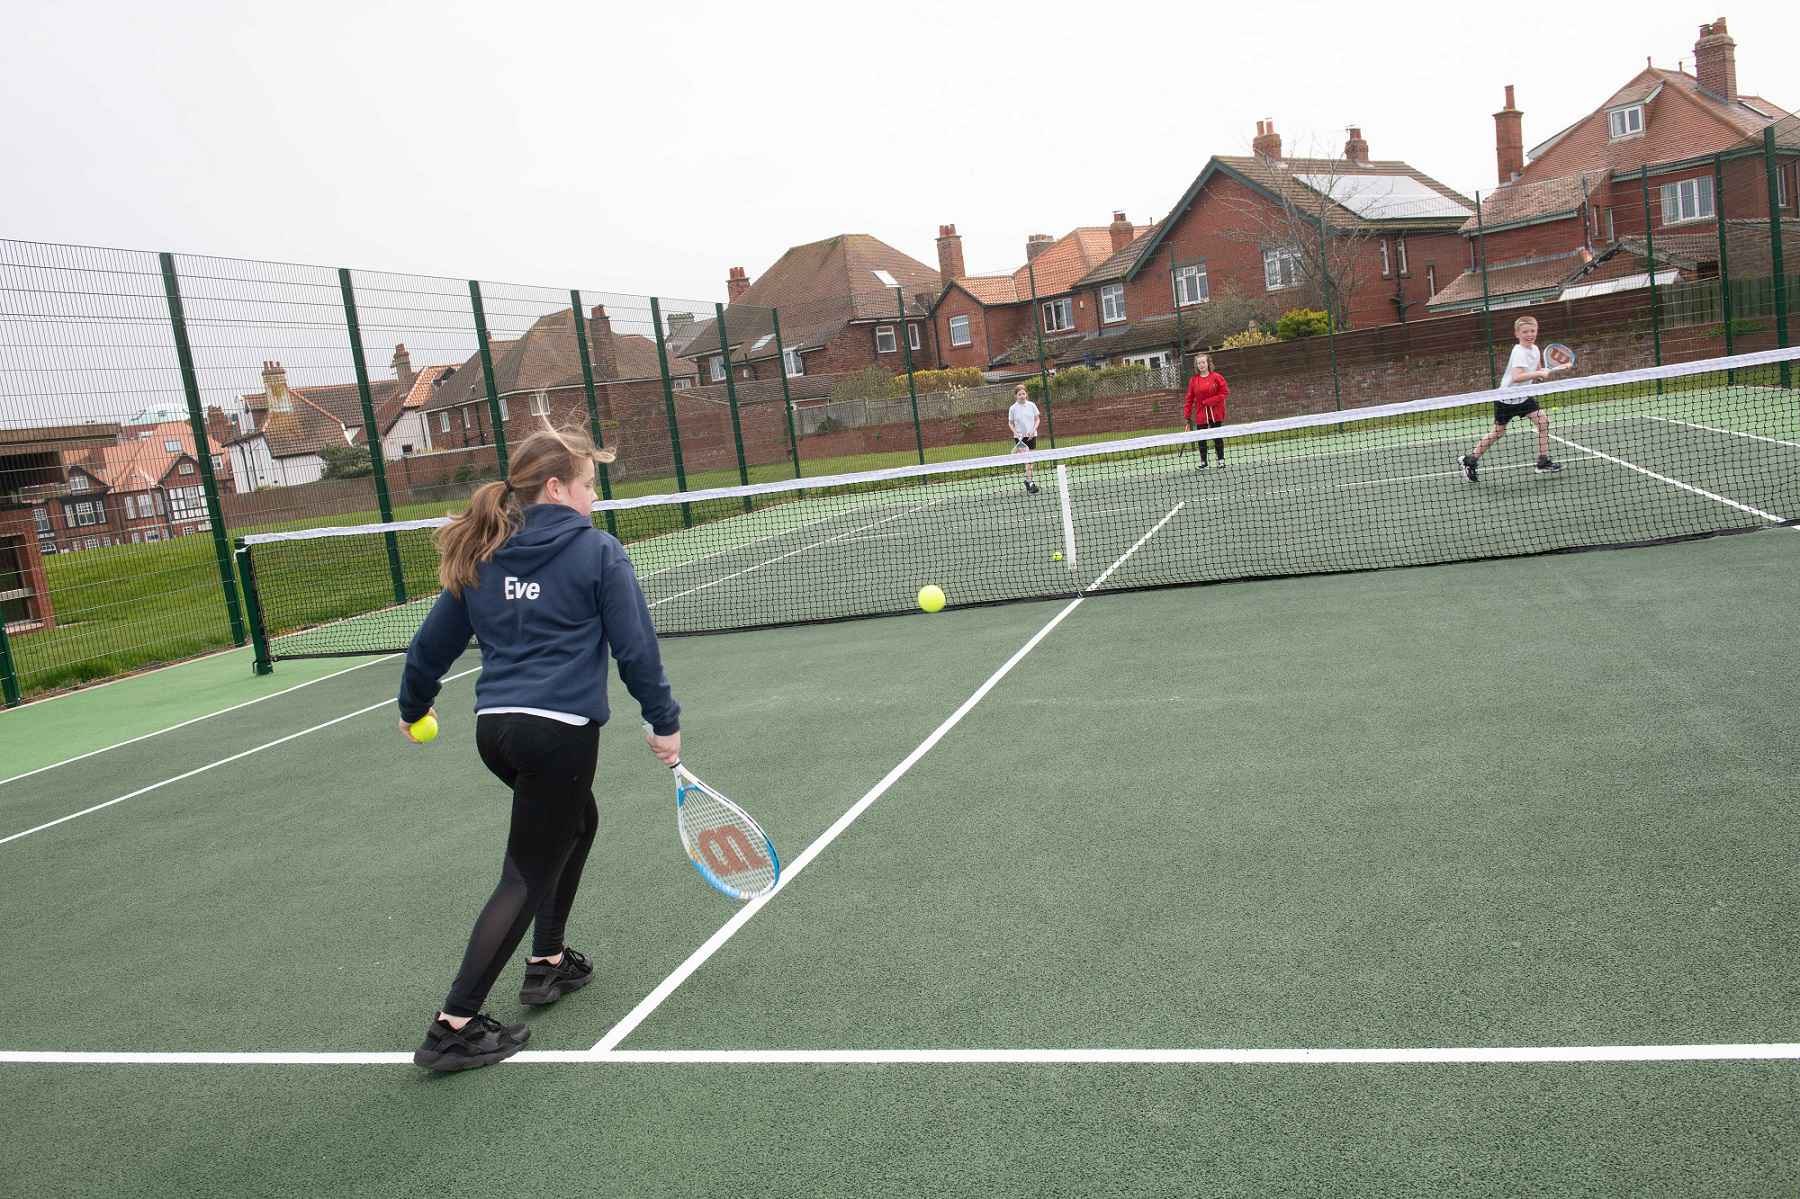 Getting easier access to clubs and sports, such as tennis, is one of the aims of the review